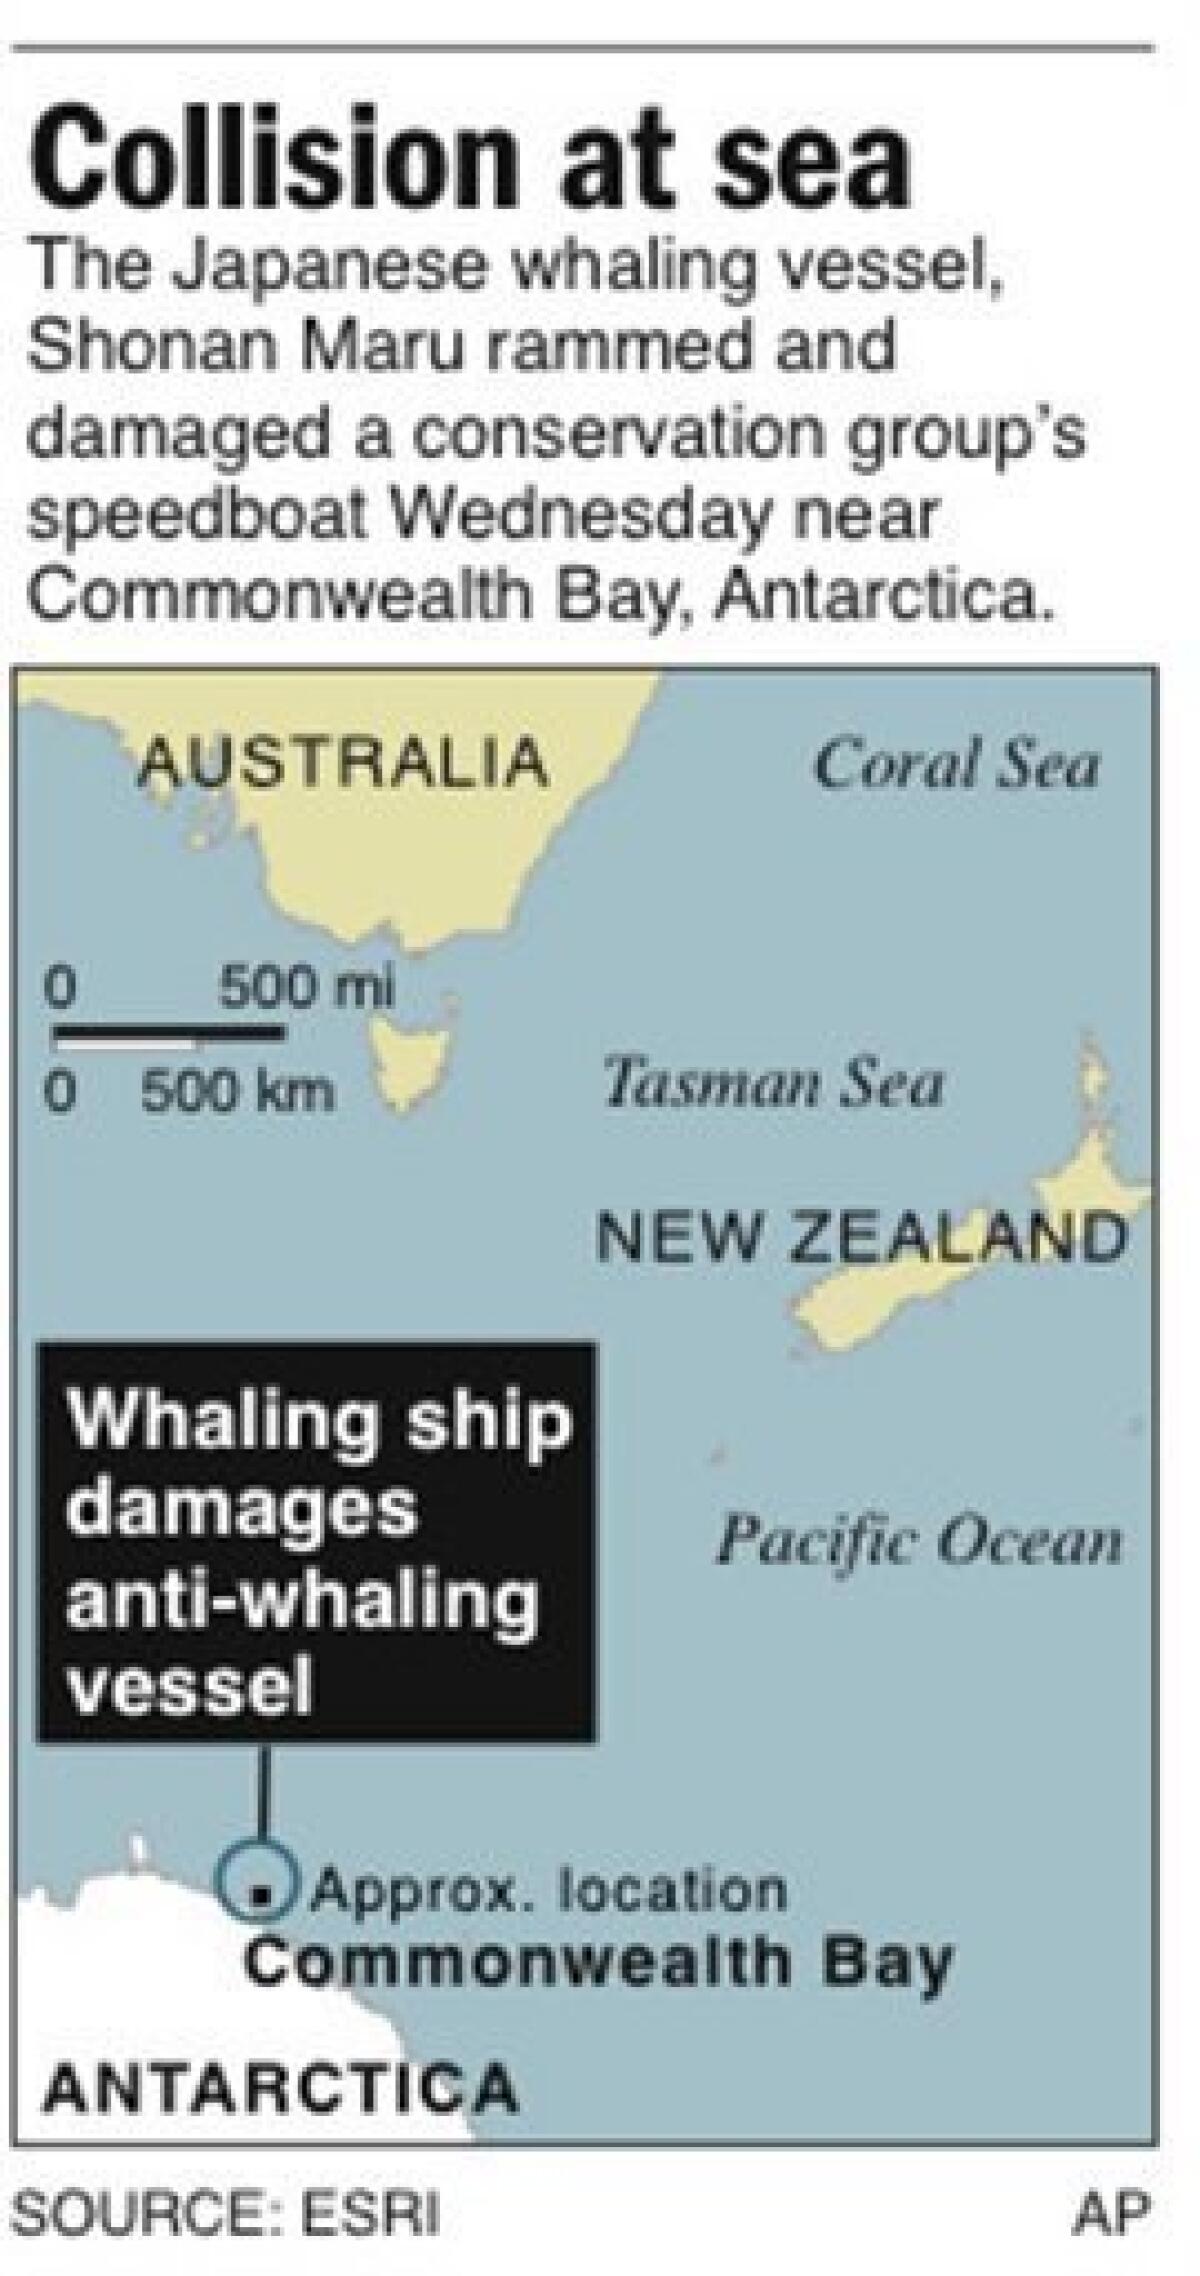 Boat damaged in anti-whaling clash